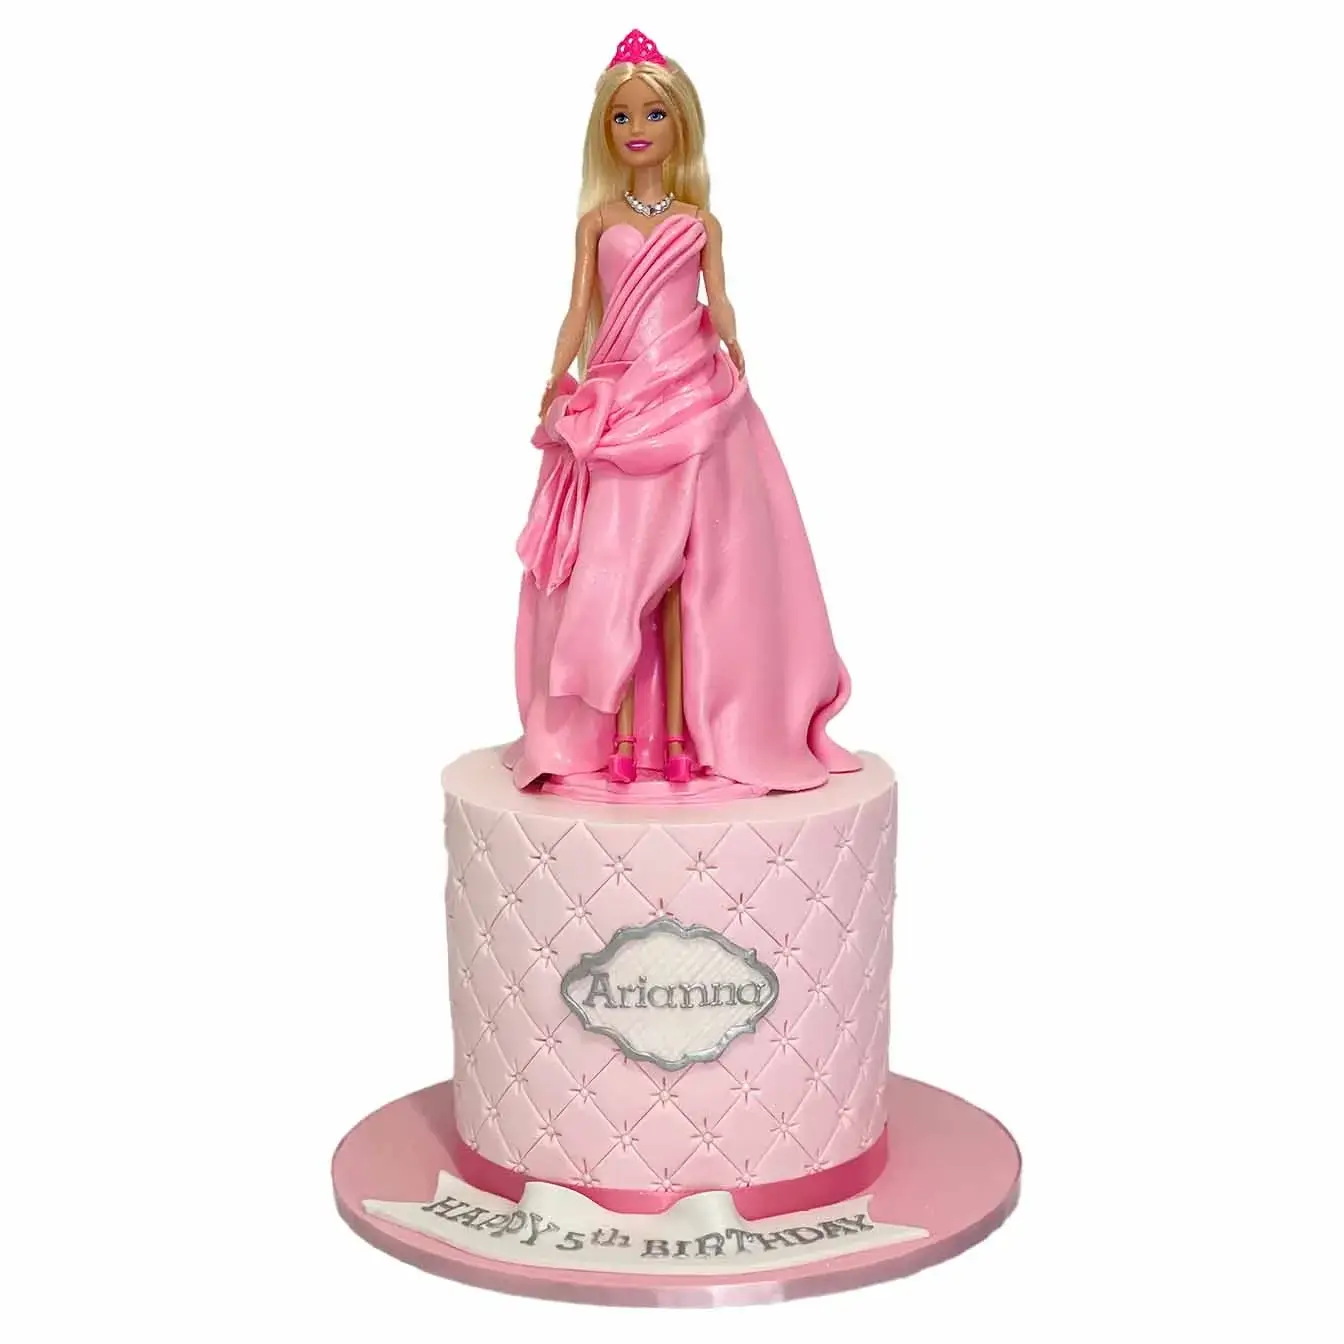 Barbie Dream Princess Cake - A cake with a pink quilted base tier and a Barbie doll wearing a fondant dress, an enchanting centerpiece for celebrations filled with imagination and dreams.